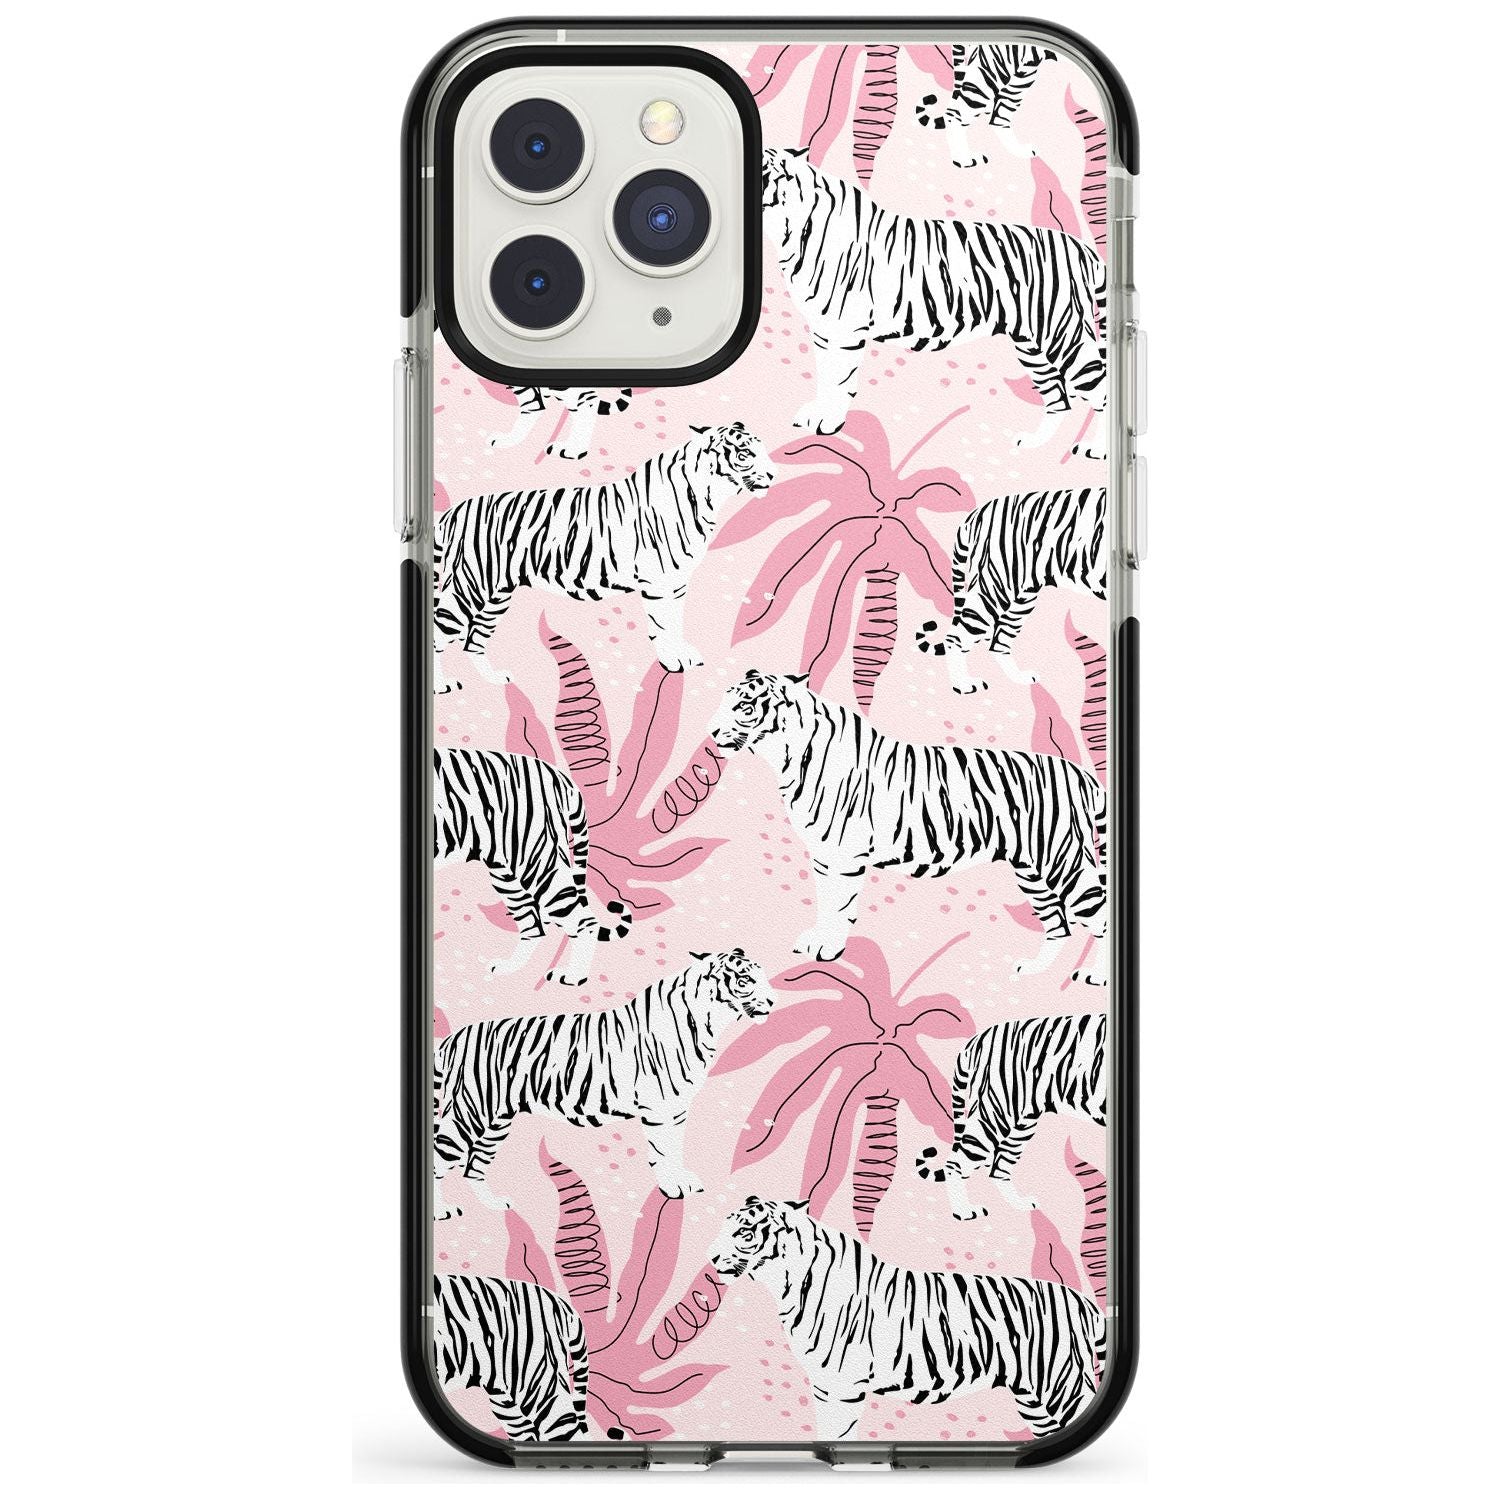 White Tigers on Pink Pattern Black Impact Phone Case for iPhone 11 Pro Max